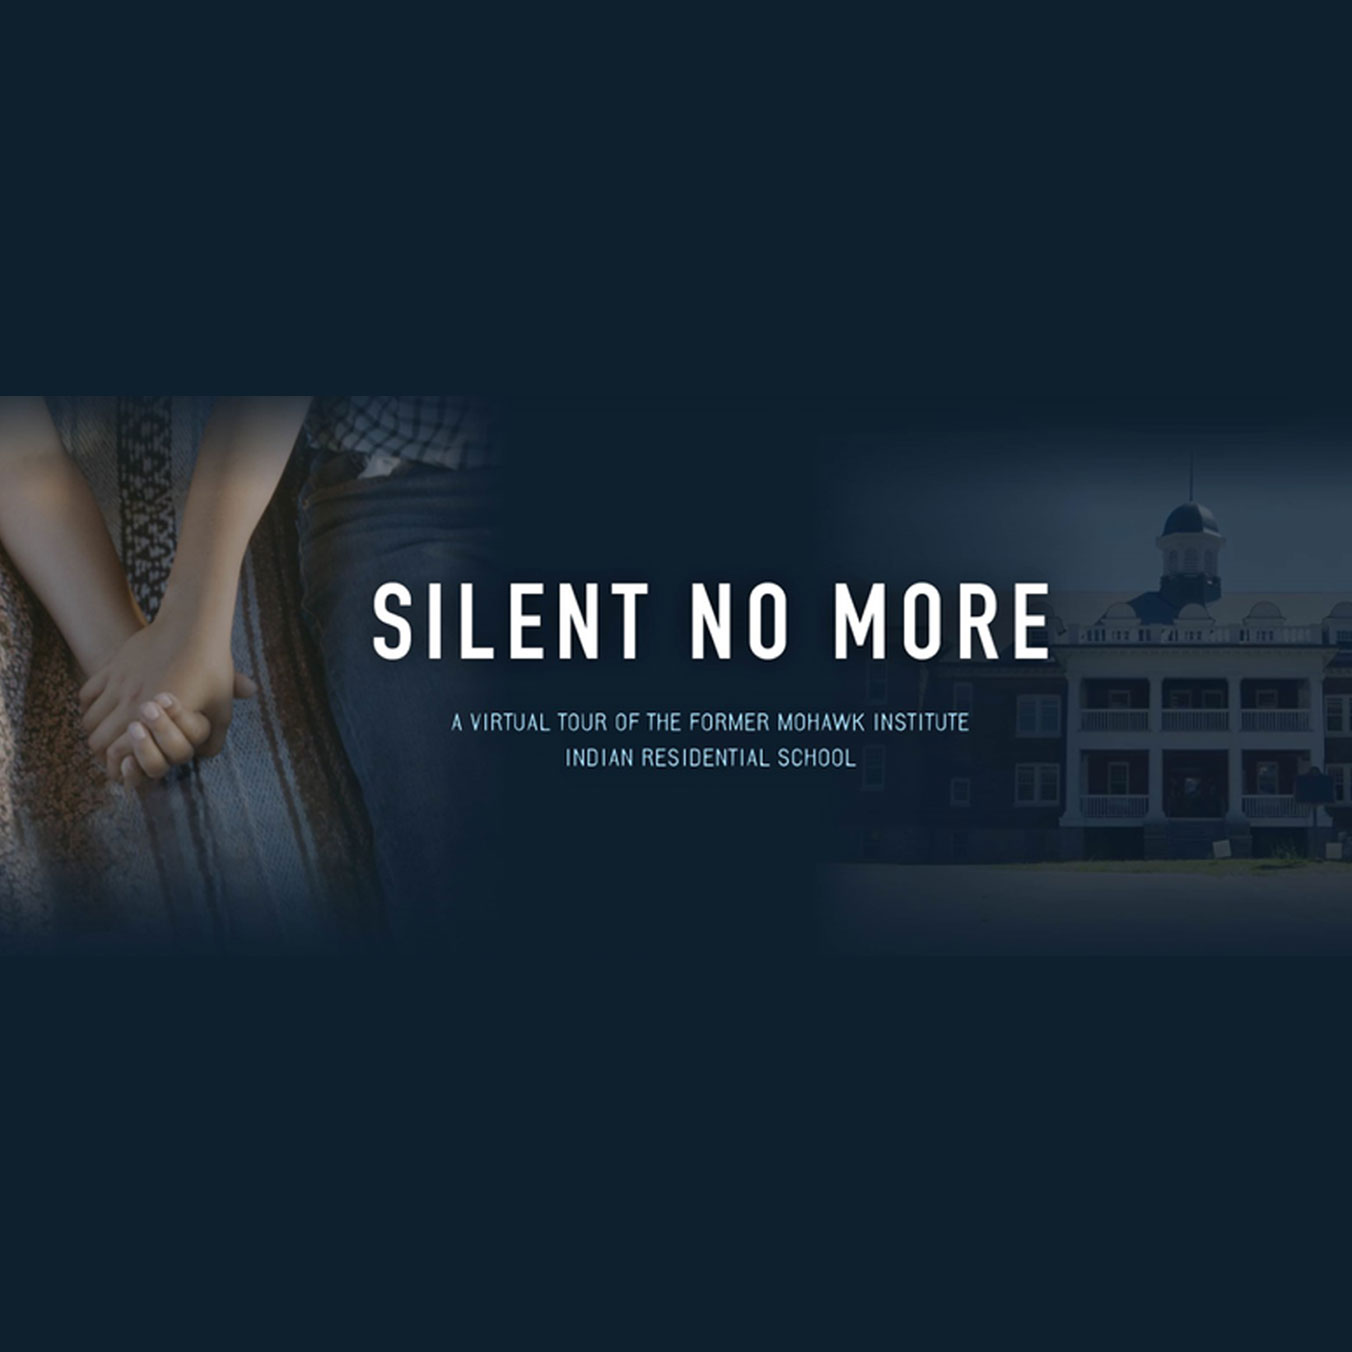 Text: "Silent No more" with children holding hands and a historic building in the background